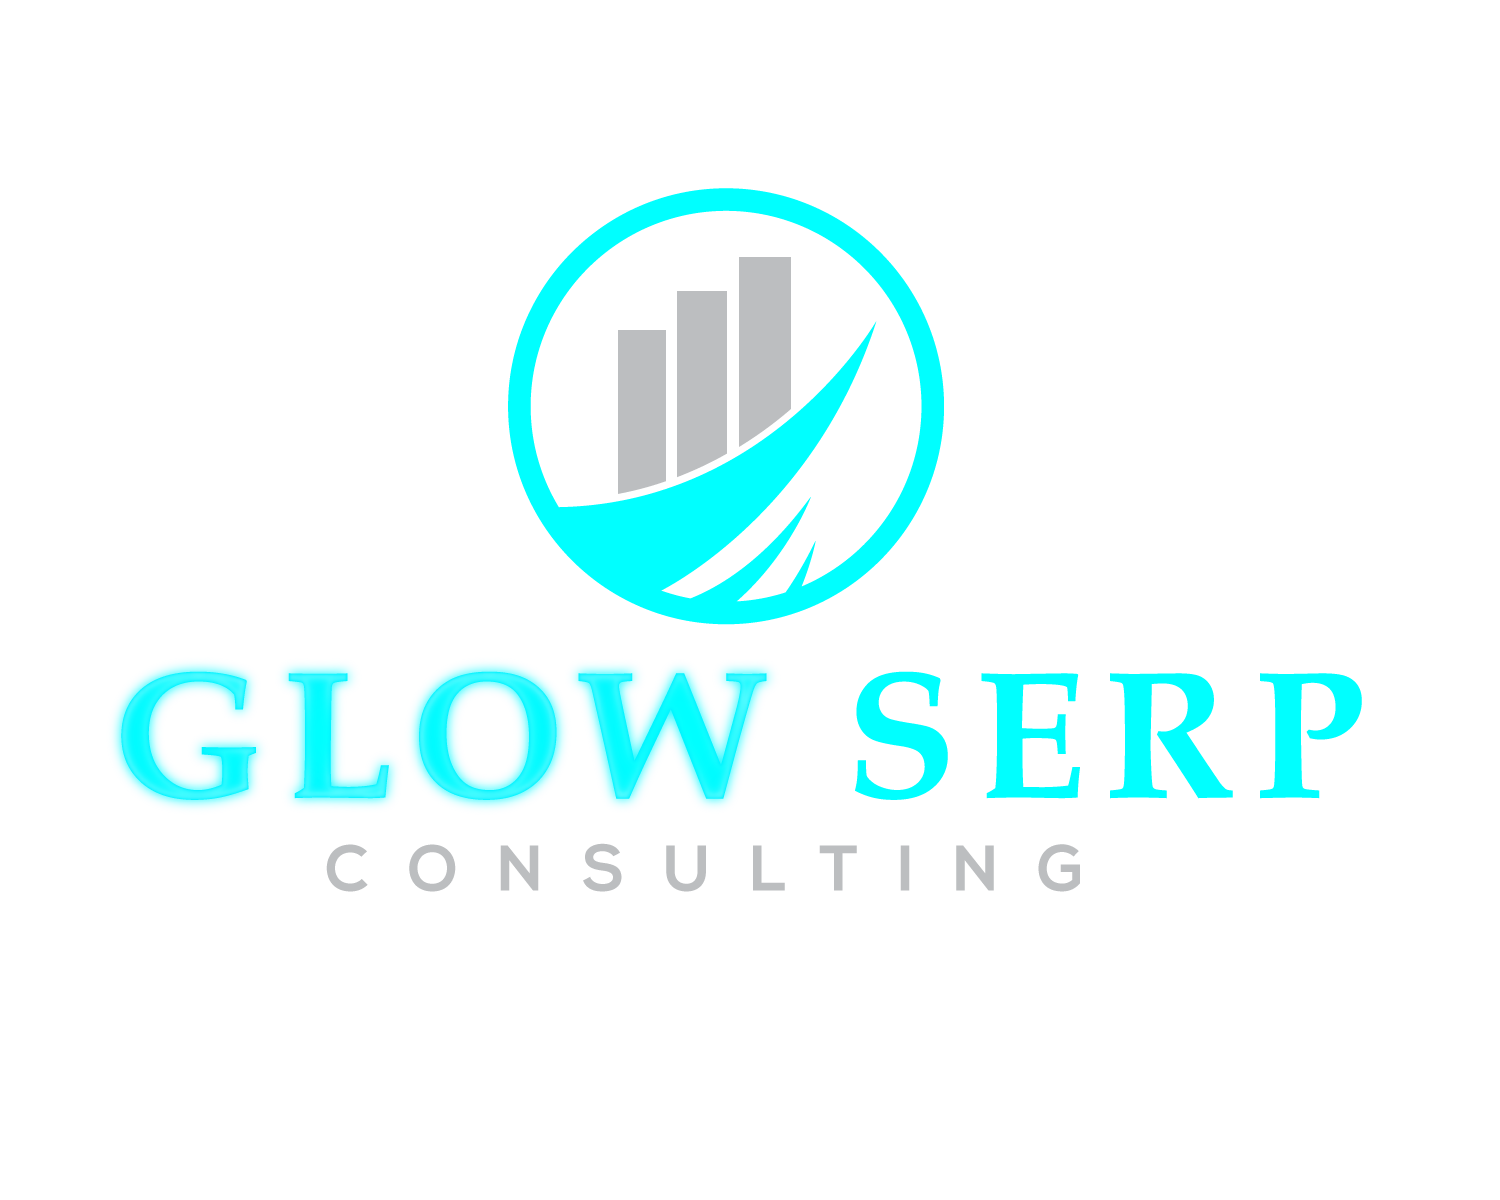 Glow Serp Consulting